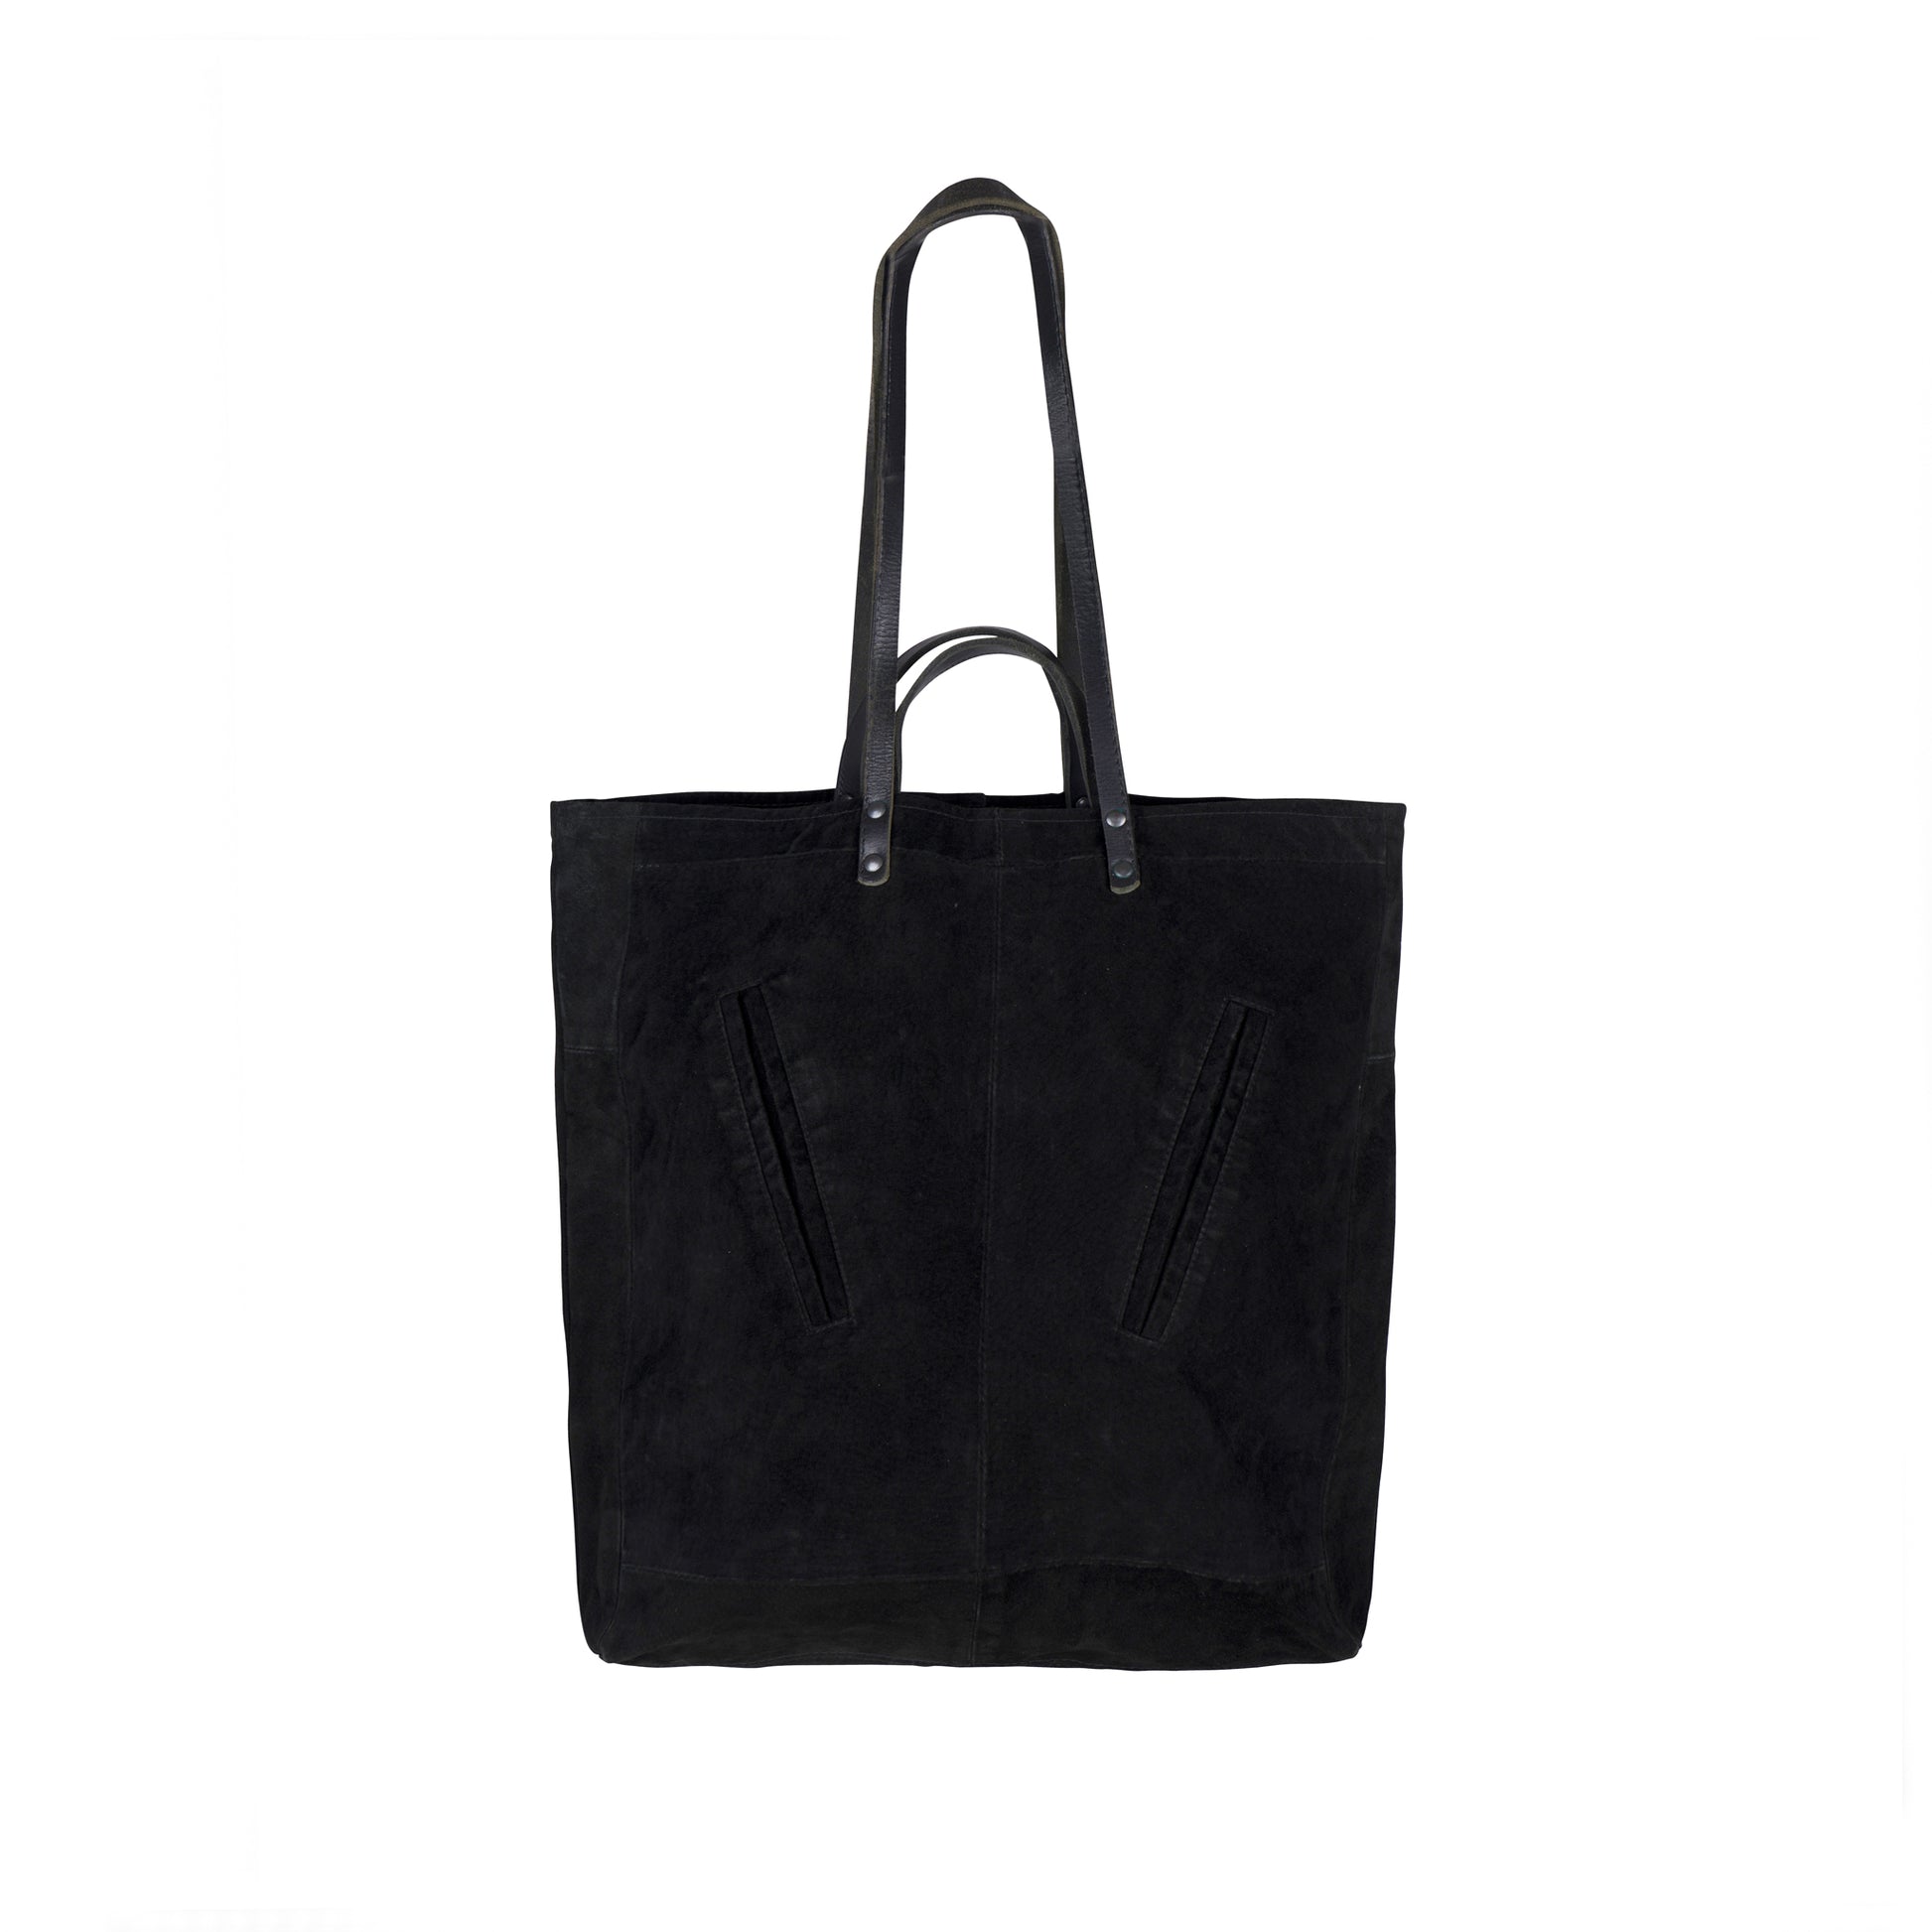 METANoIA black recycled leather tote handbag back with original leather piece wherever possible, every bag has a unique pocket placement.